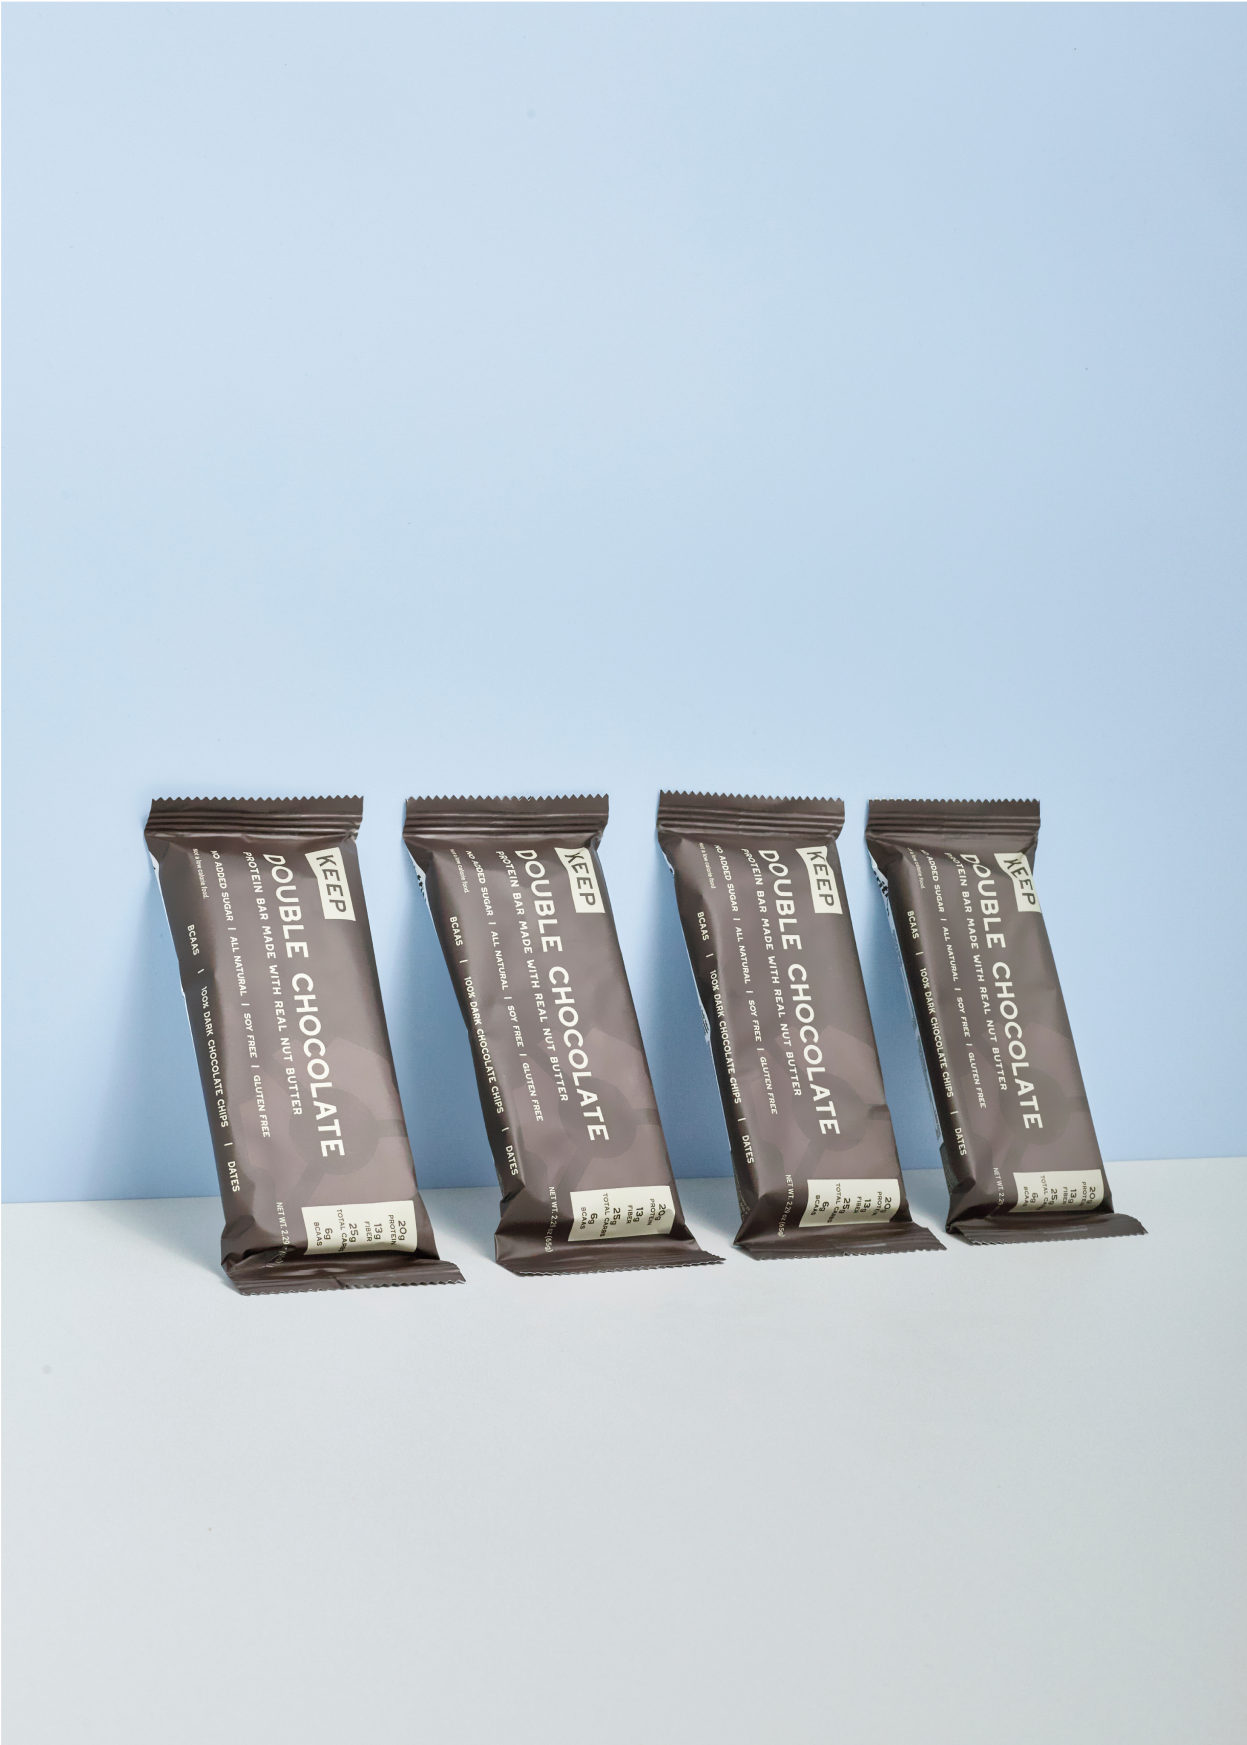 Group of double chocolate protein bars